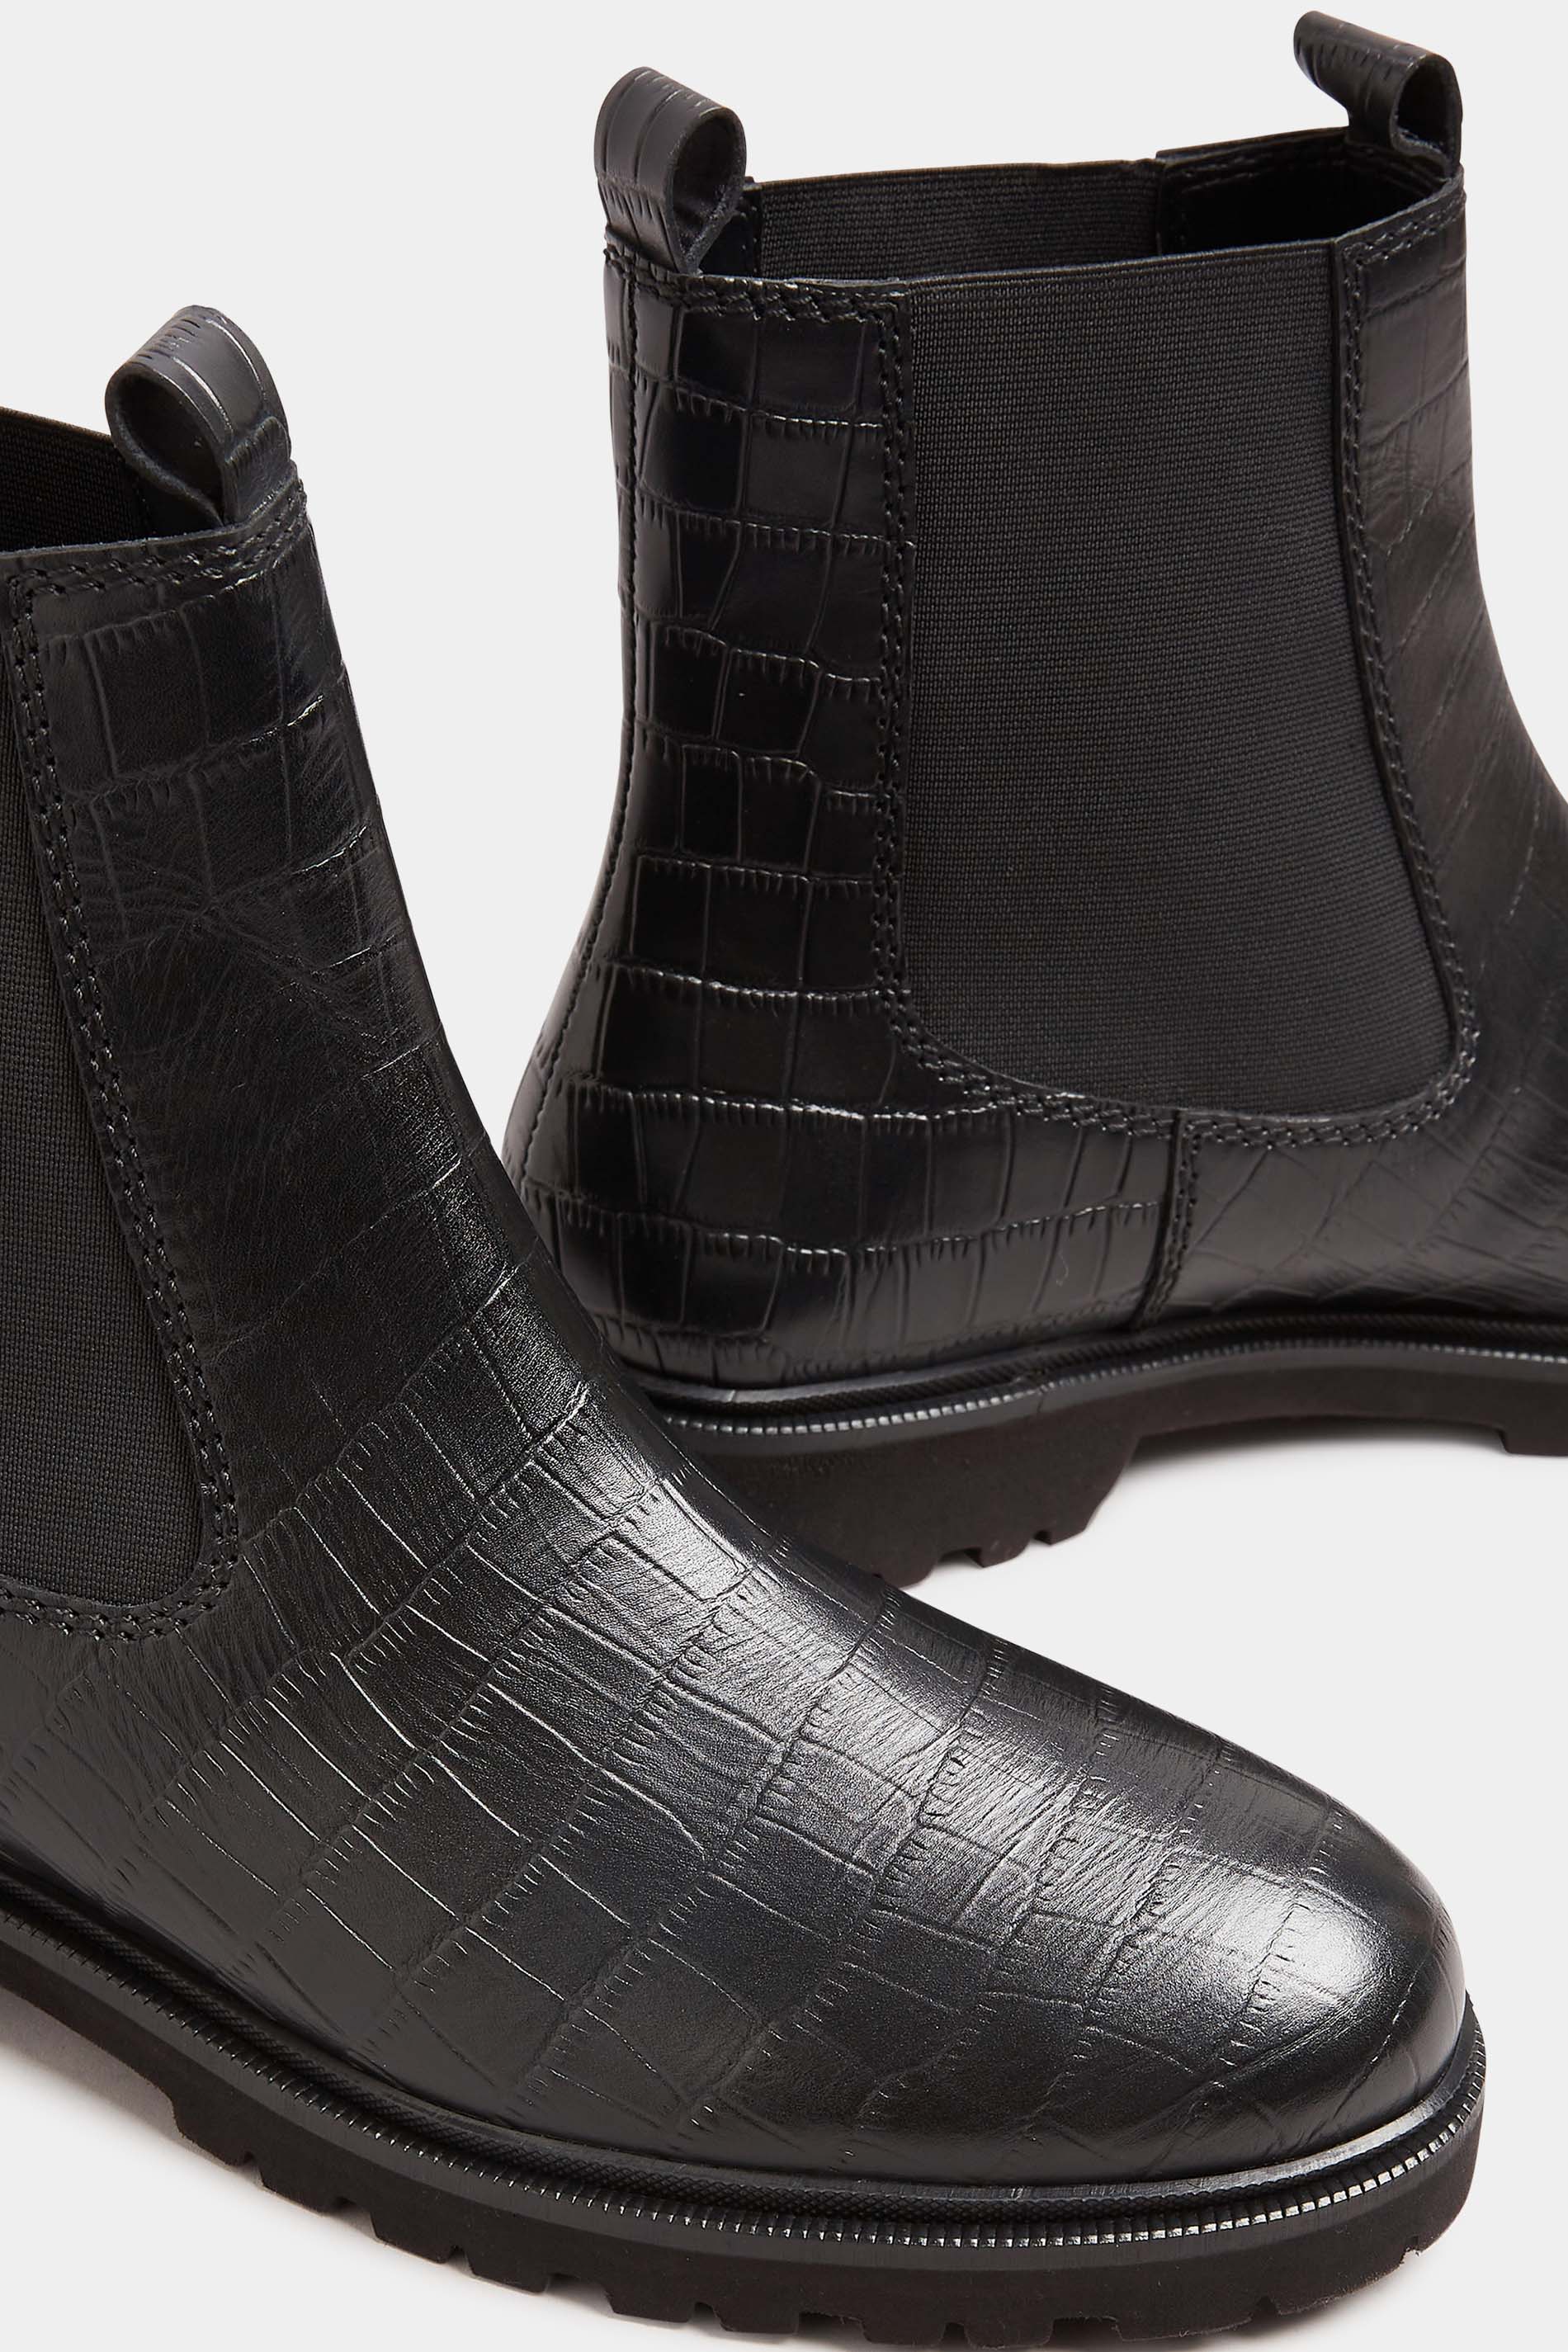 Black Croc Boots In Standard Fit | Long Tall Sally